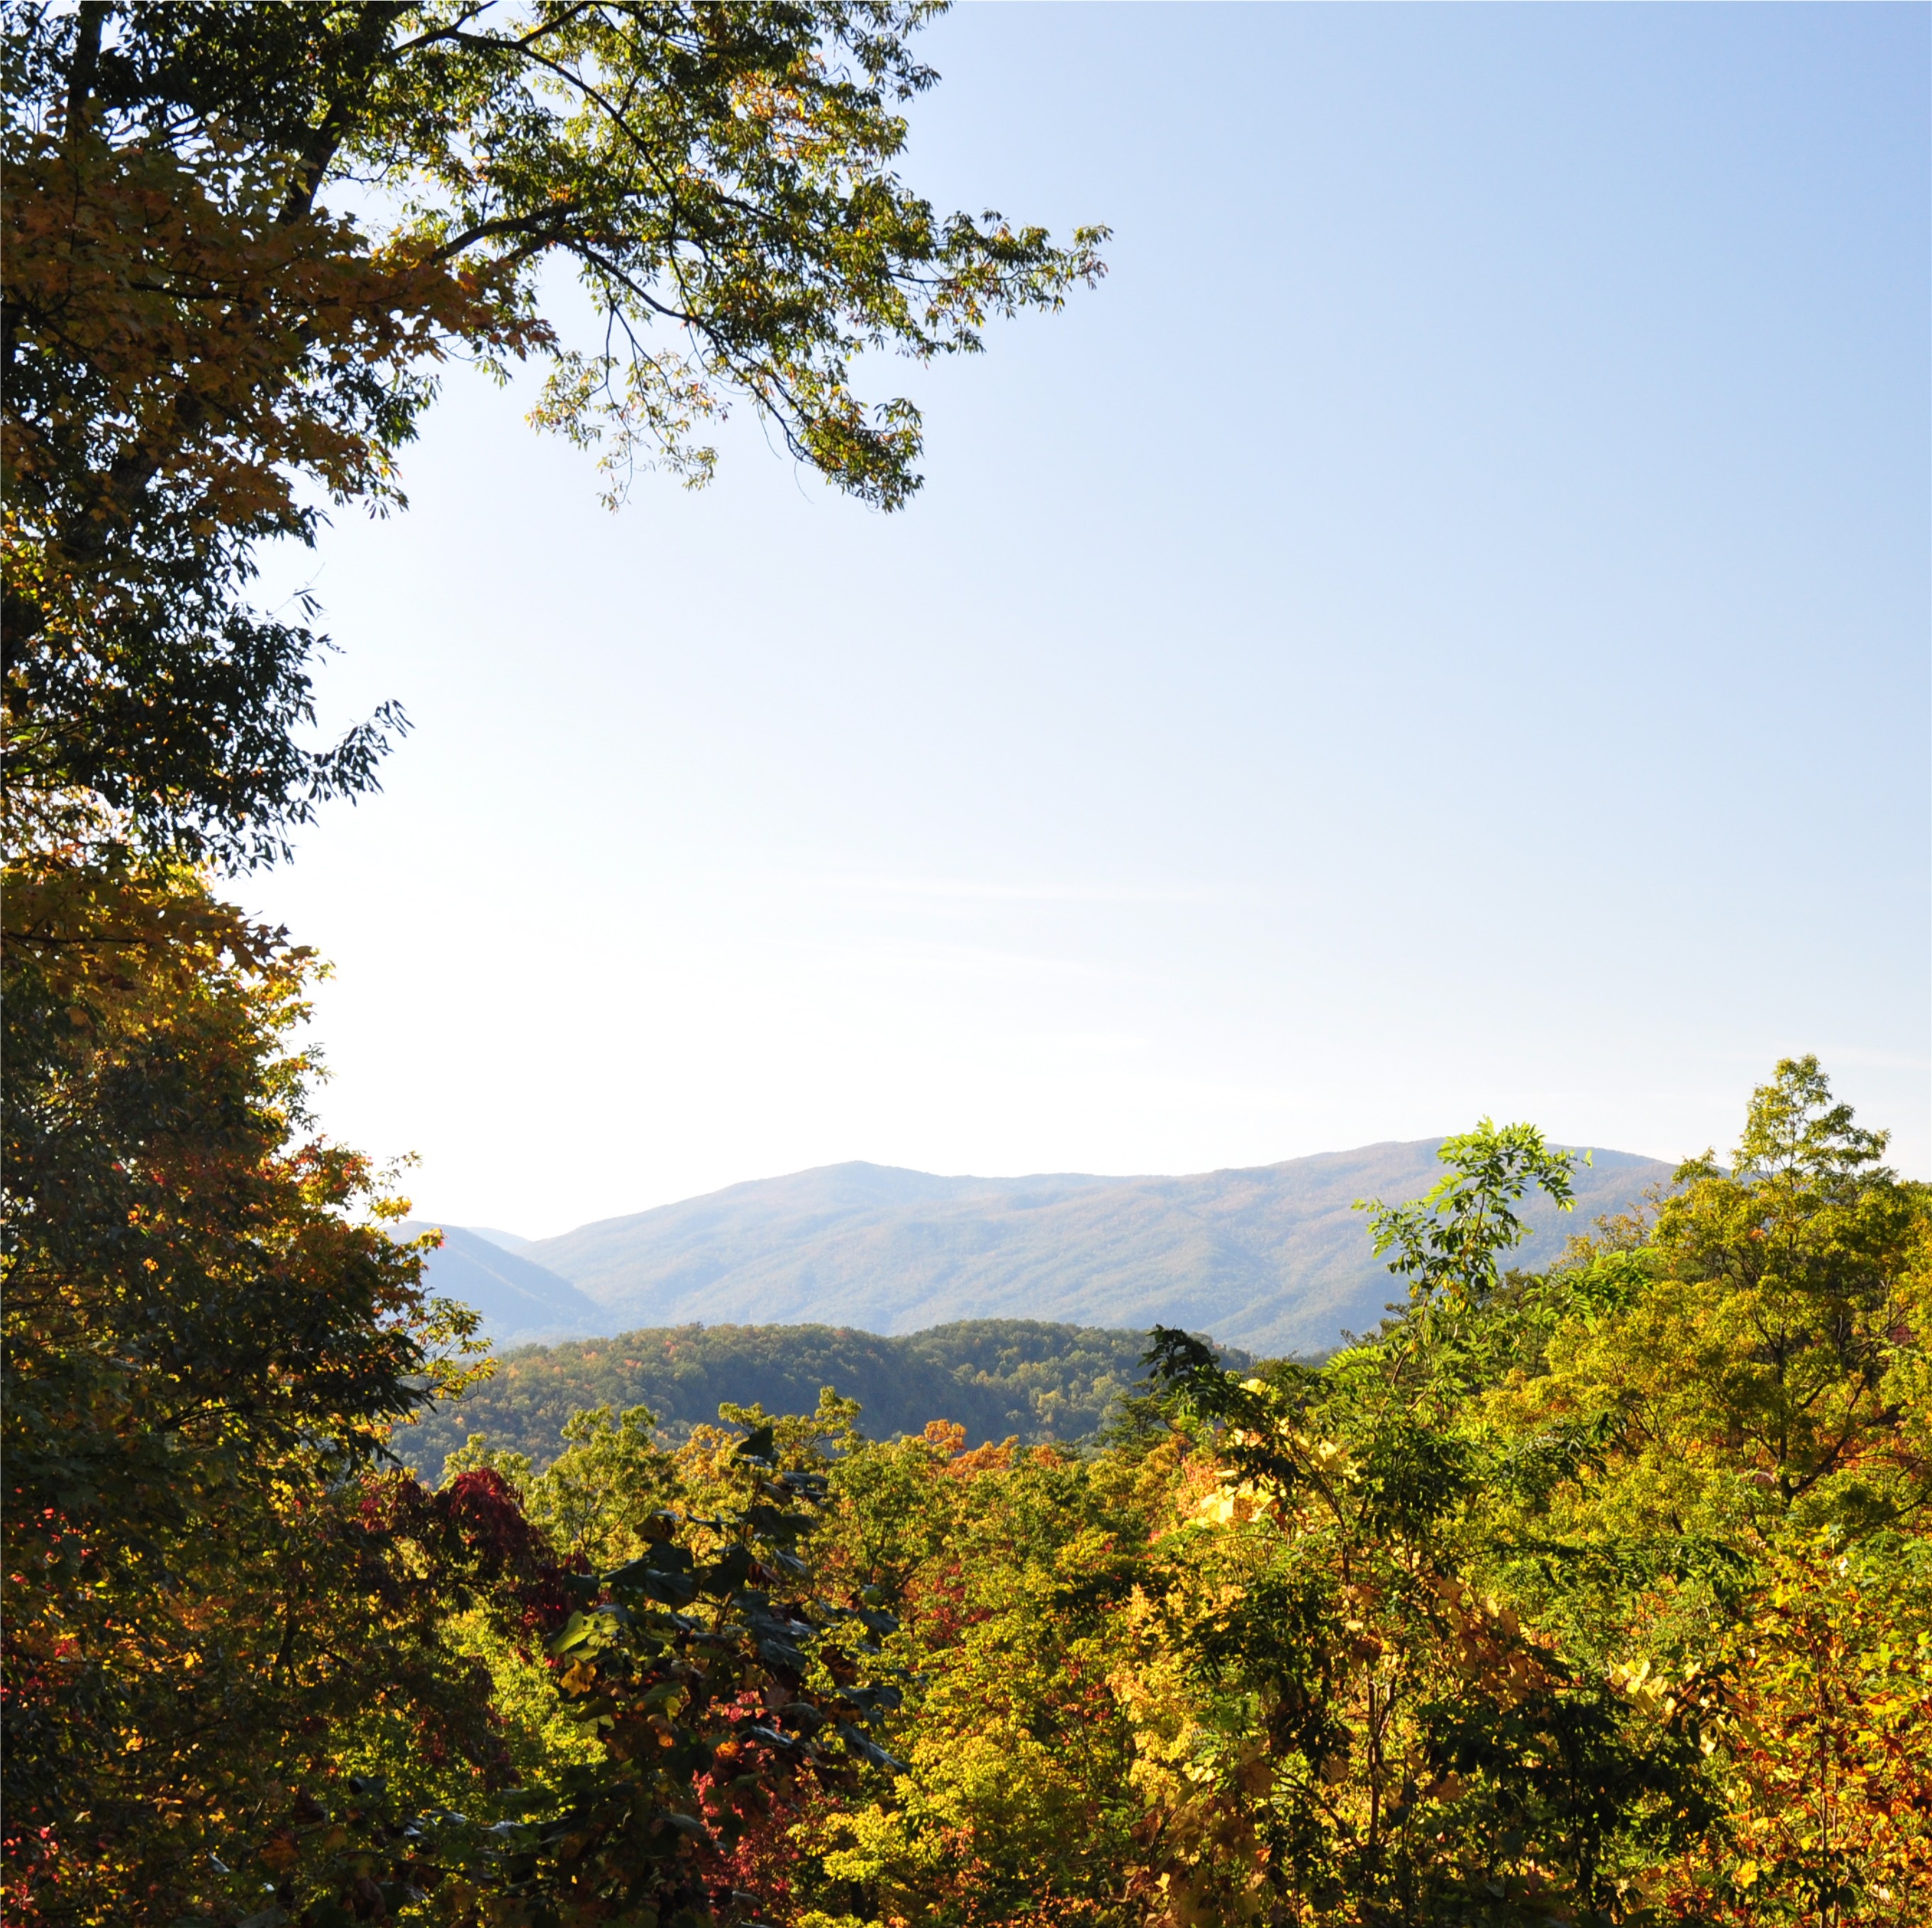 The Great Smoky Mountains National Park is the most visited national park in the country with over 9 million annual visitors.